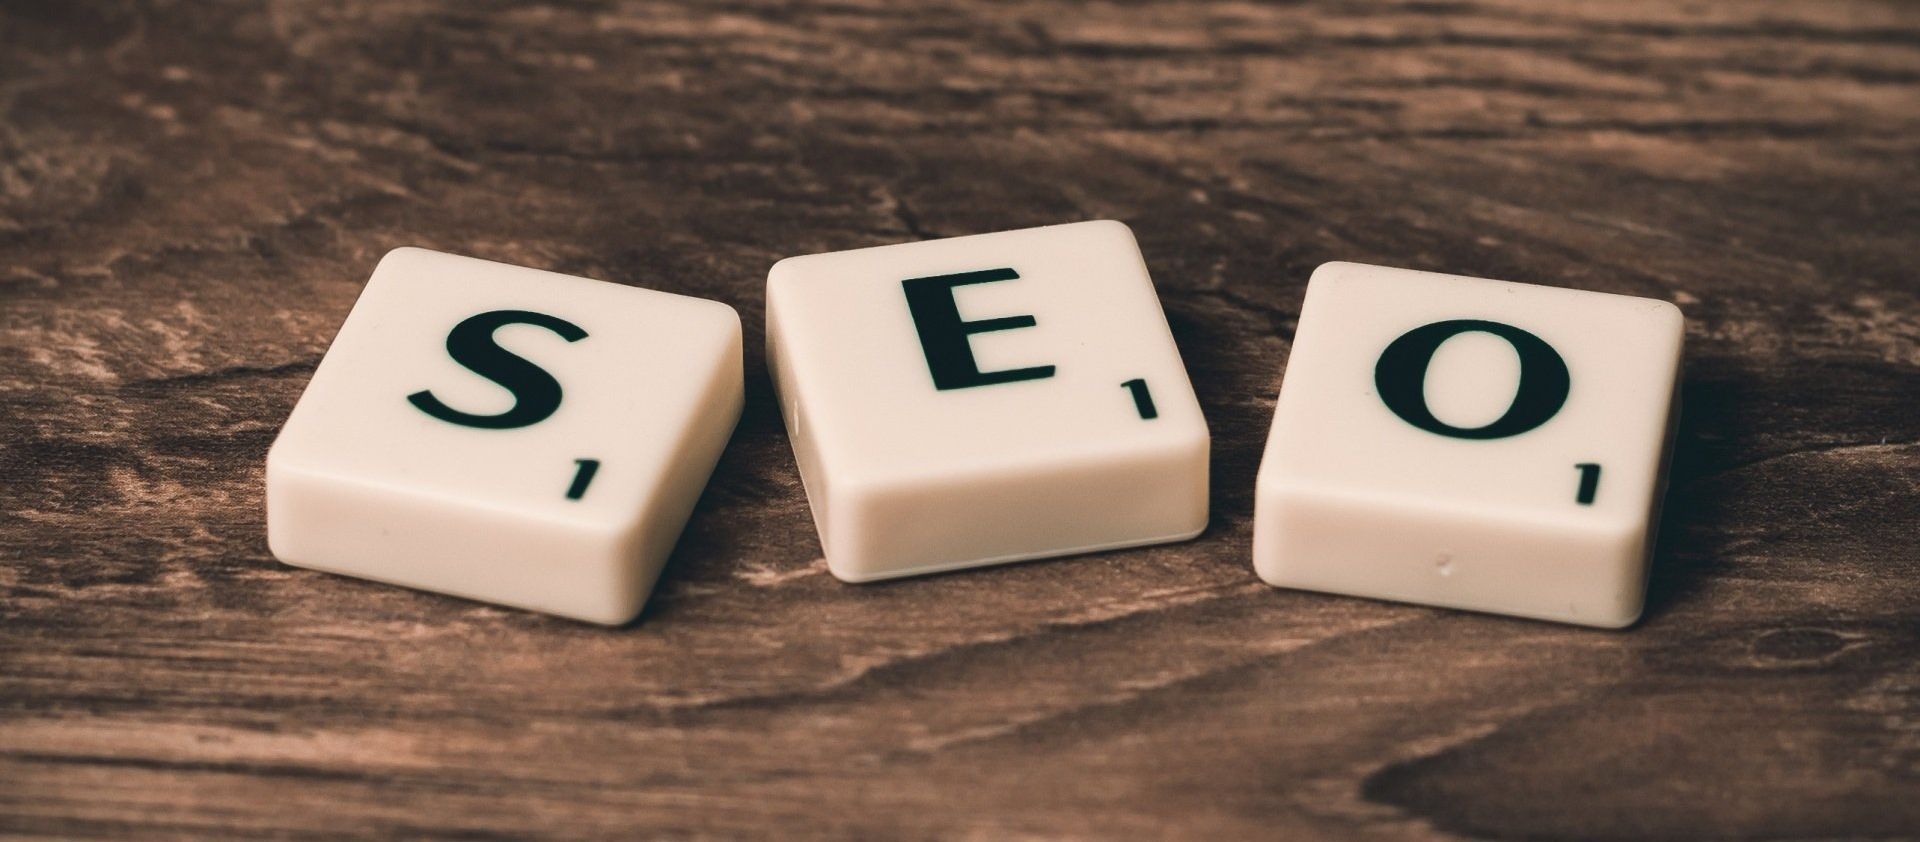 Why Local SEO Is So Important For Small Businesses